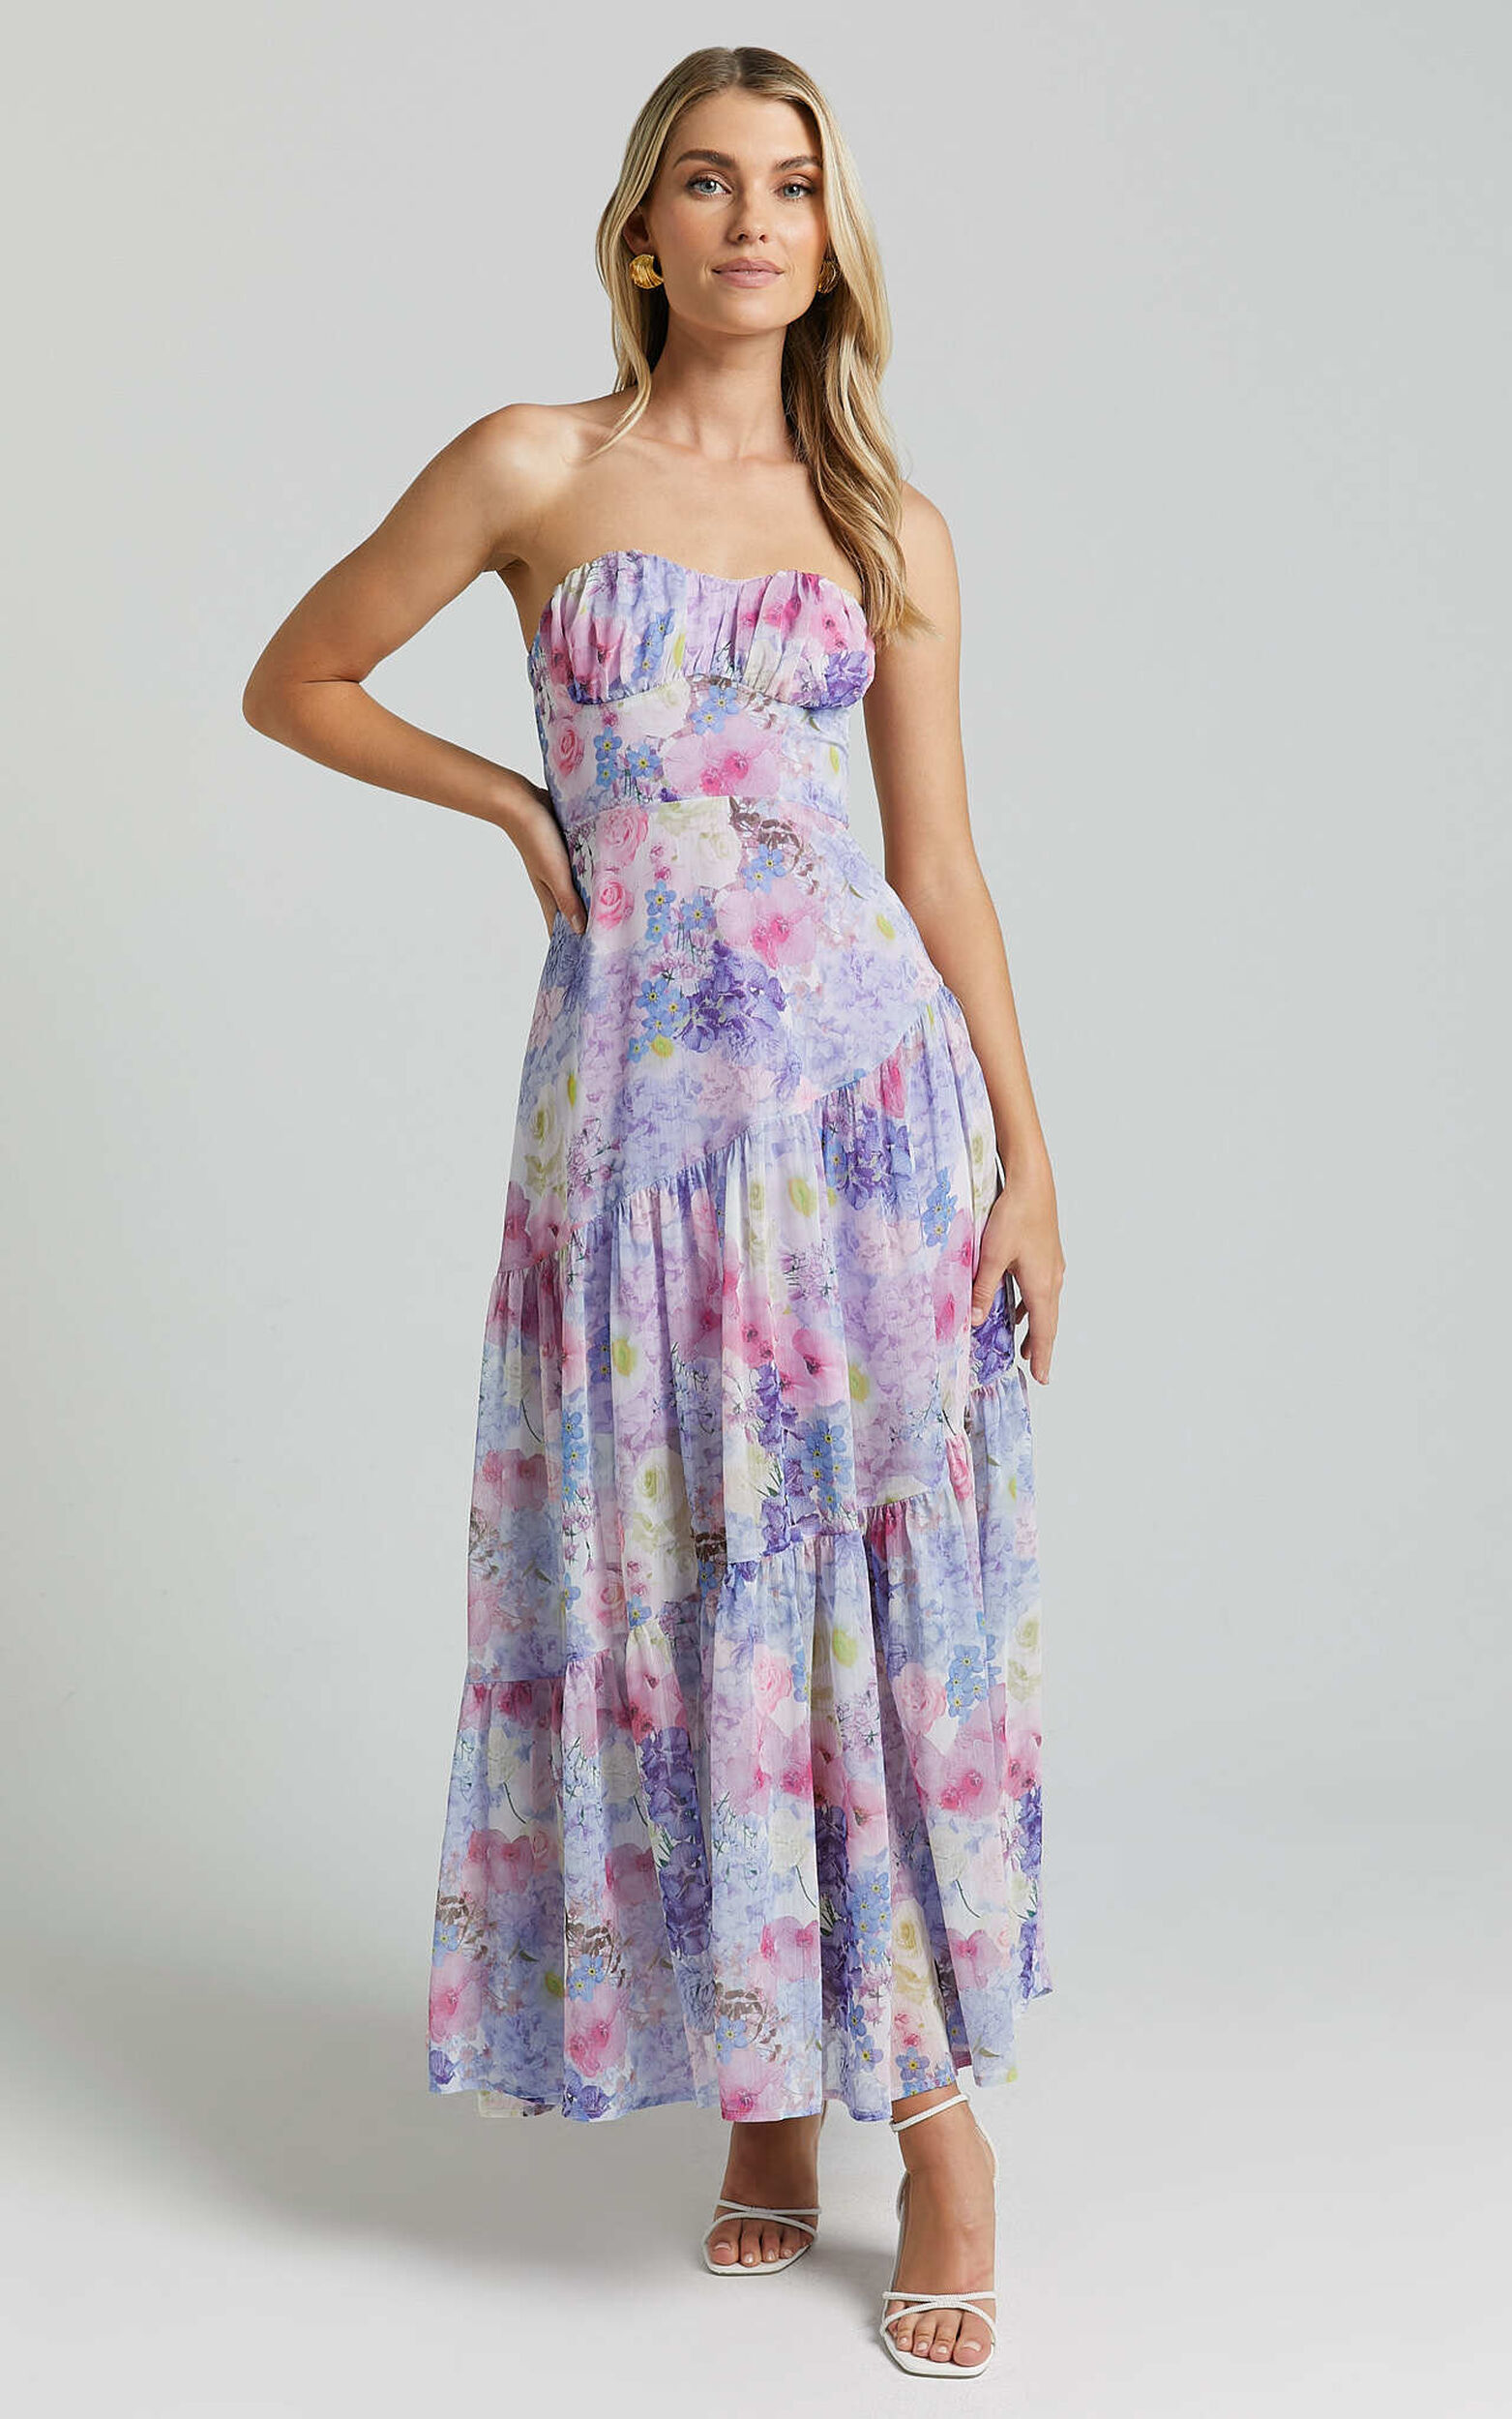 Rheanny Maxi Dress - Sweetheart Strapless Tiered Dress in Pink Purple Floral - 06, PNK1